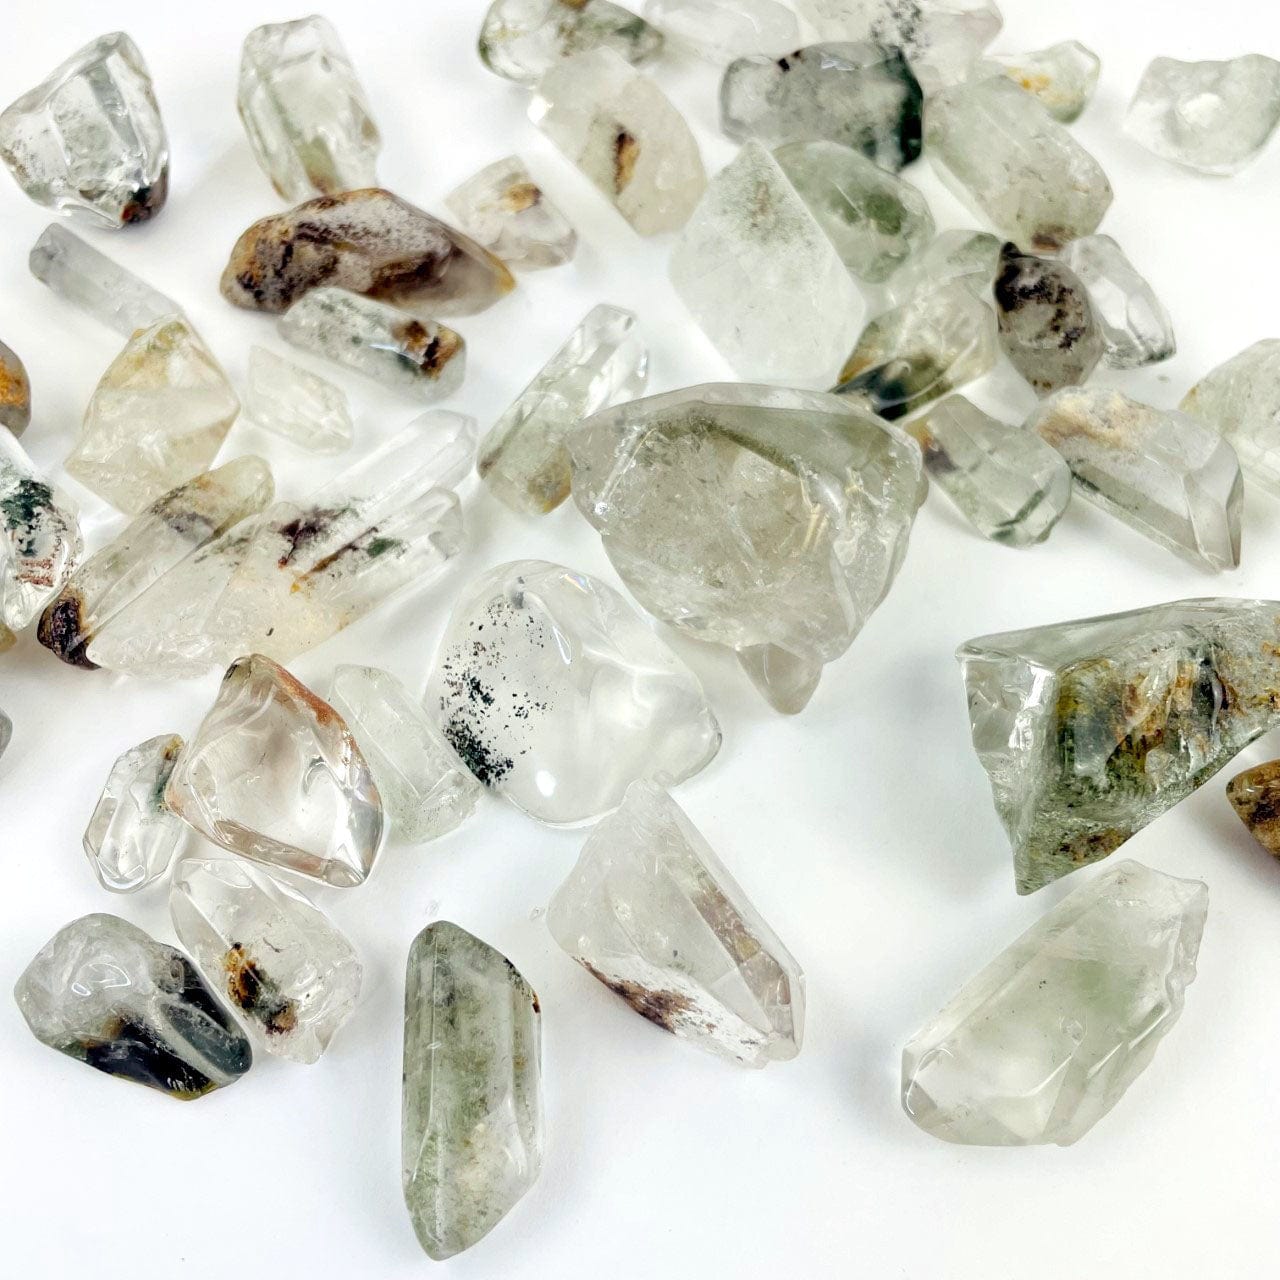 Polished Crystal Quartz Points with Chloride 